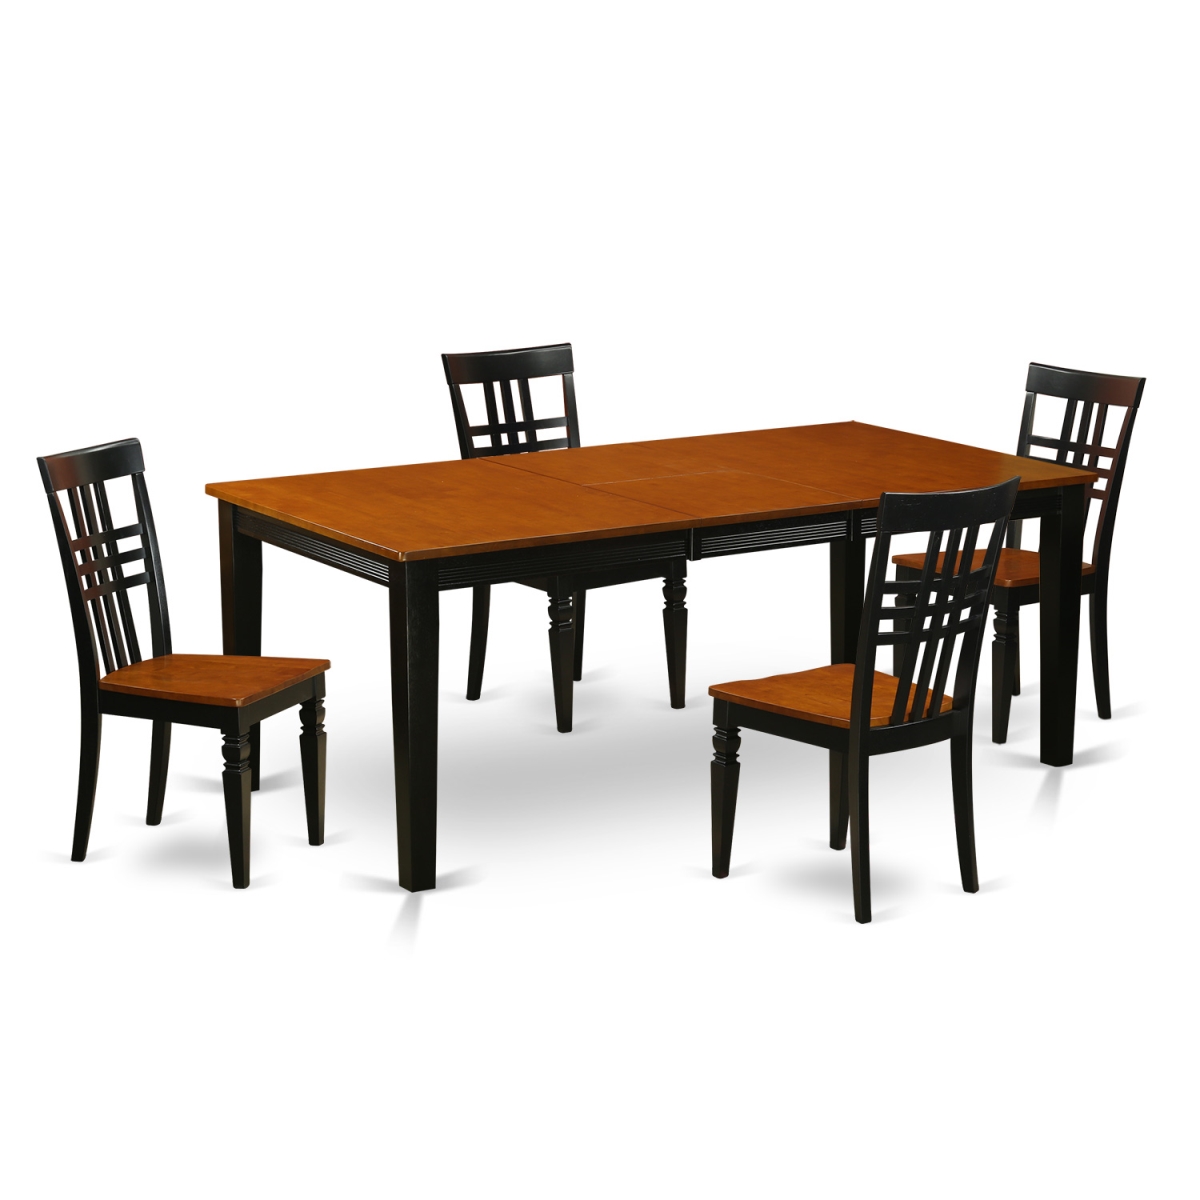 QULG5-BCH-W Kitchen Table Set with One Quincy Dining Room Table & 4 Chairs, Black & Cherry - 5 Piece -  East West Furniture